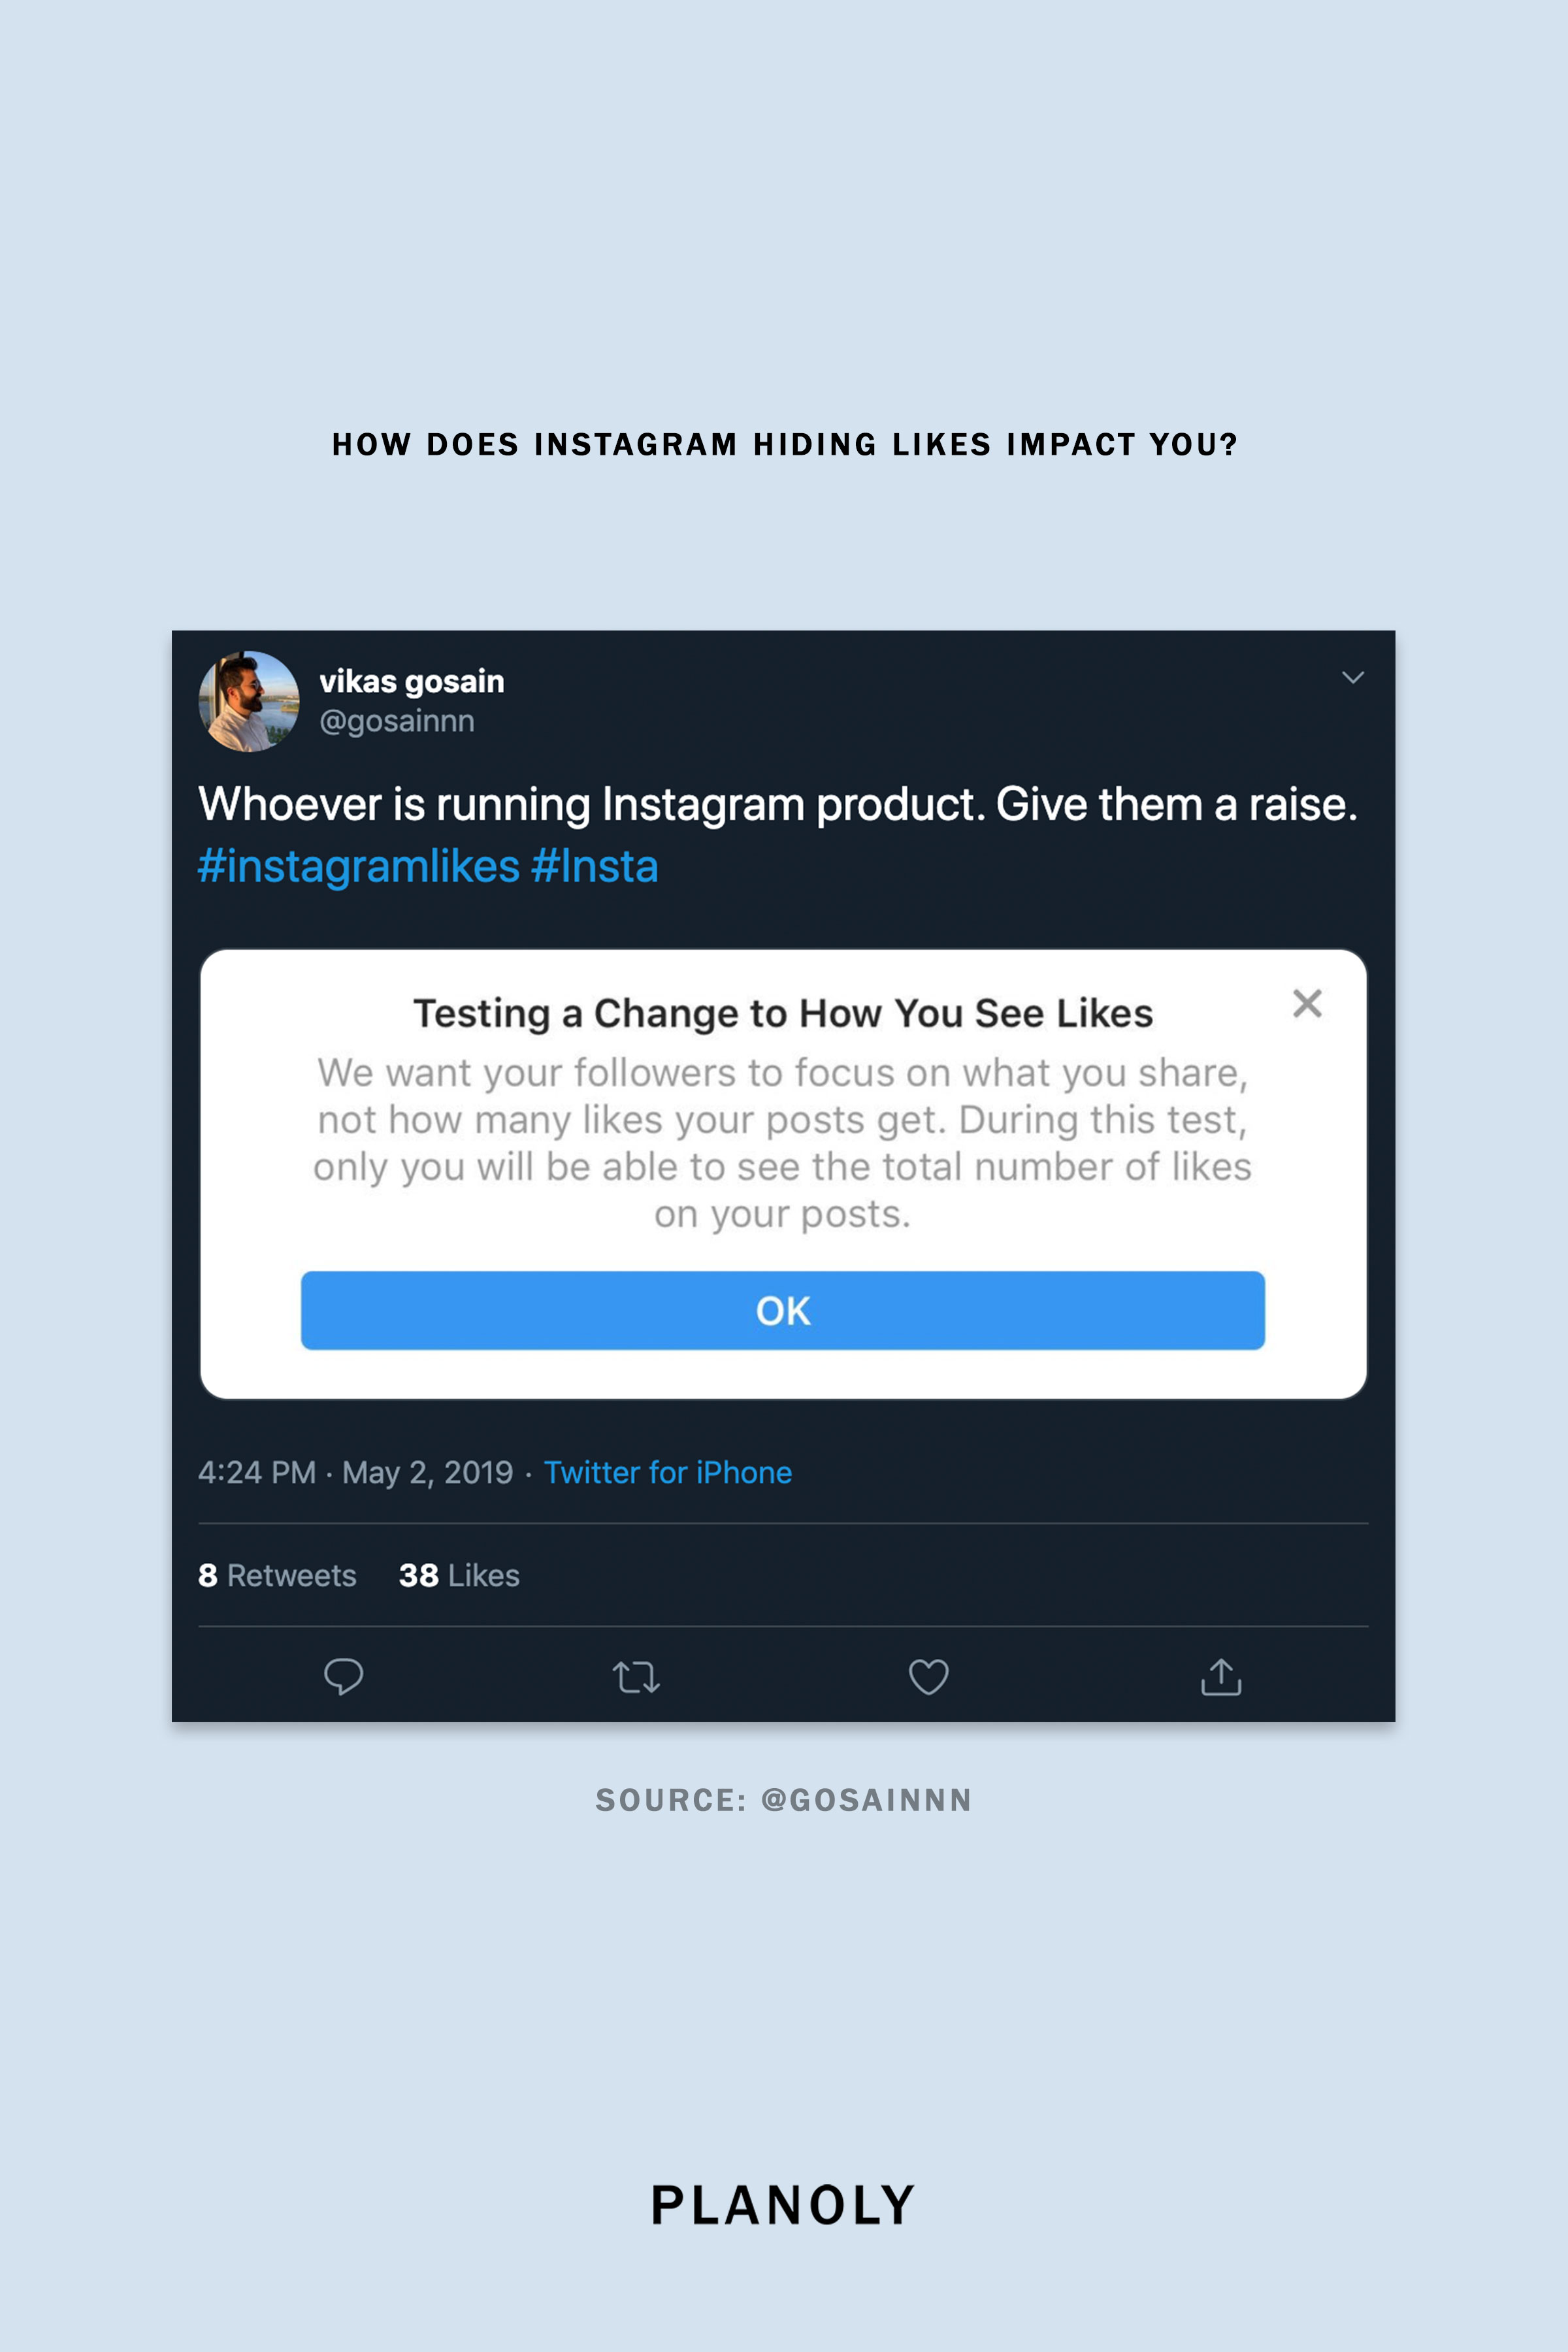 How Does Instagram Hiding Likes Impact You?